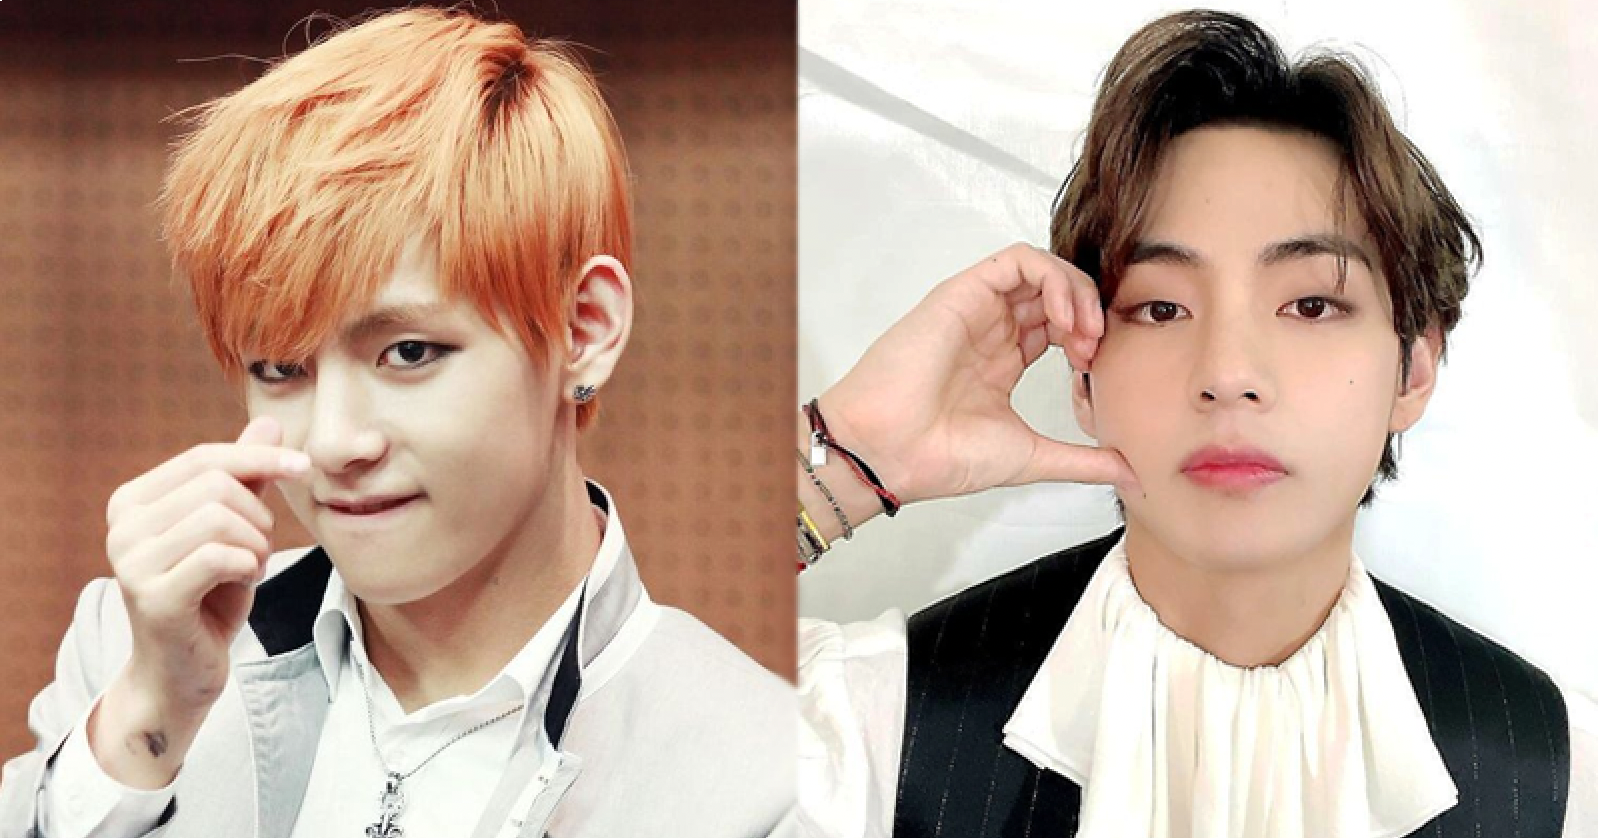 Here’s The Evolution Of BTS’s V From Debut To Now